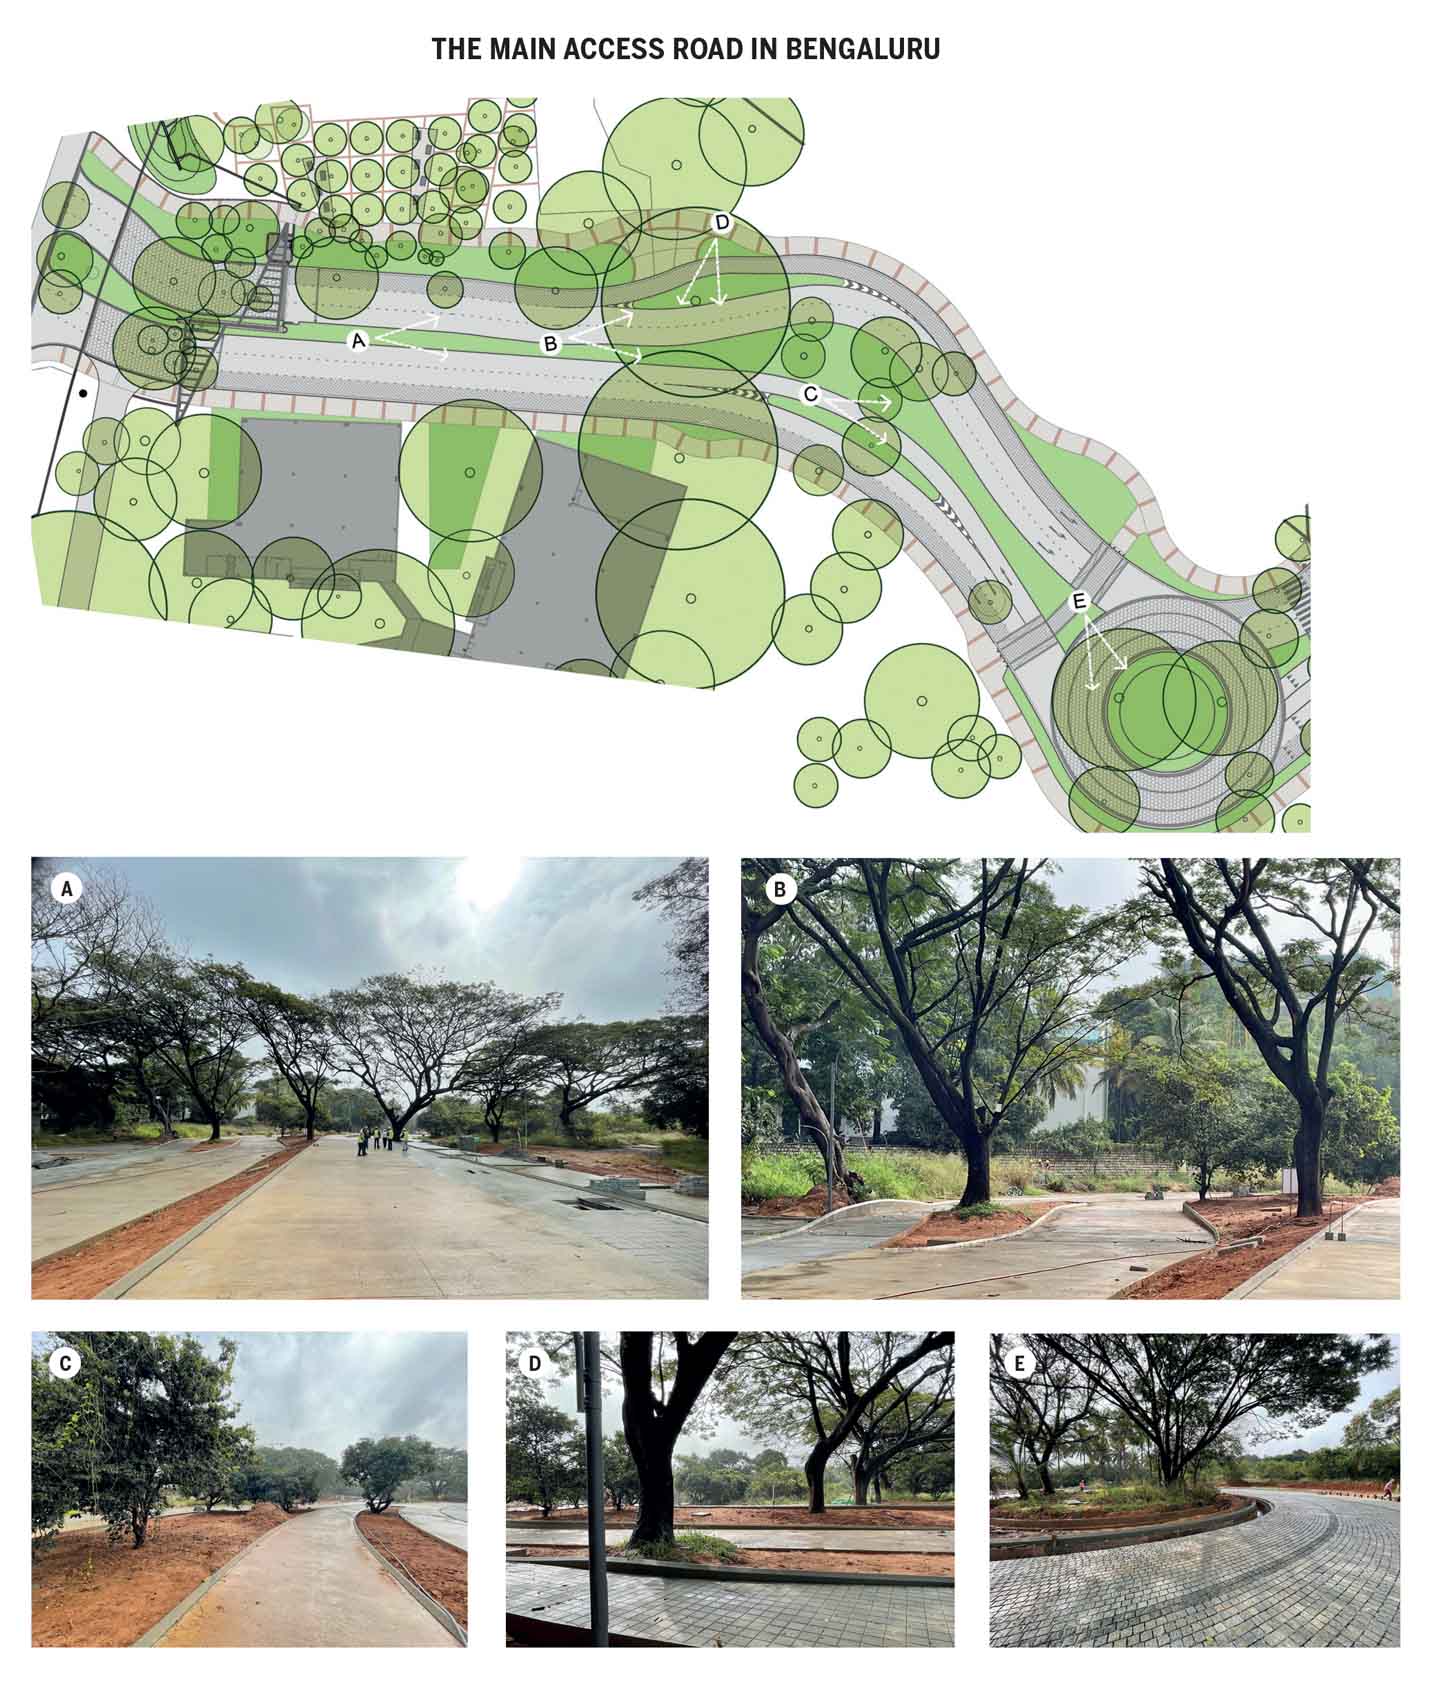 wiggling-roads-other-design-strategies-save-trees-main-access-road-bengaluru